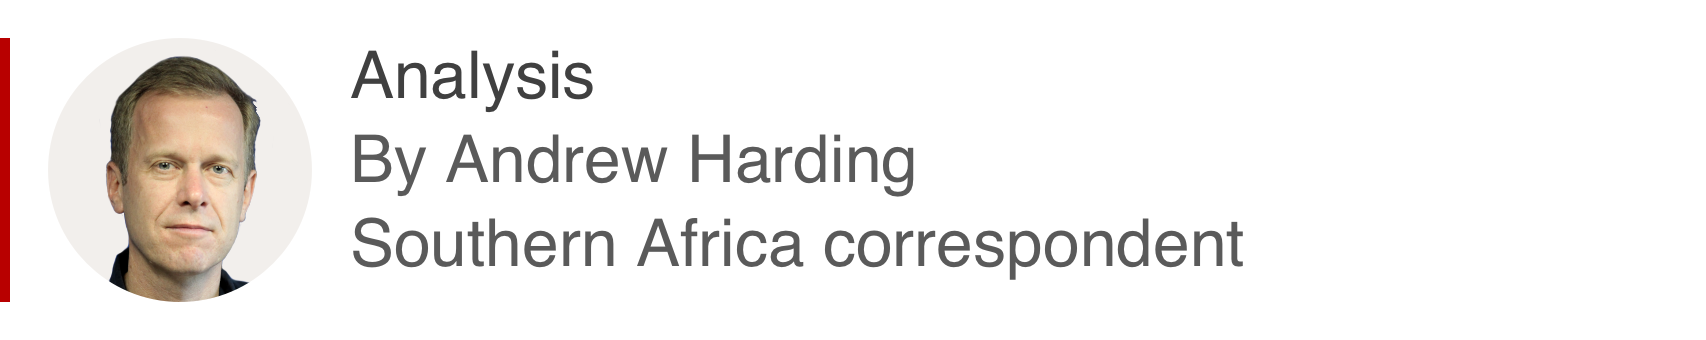 Analysis box by Andrew Harding, southern Africa correspondent